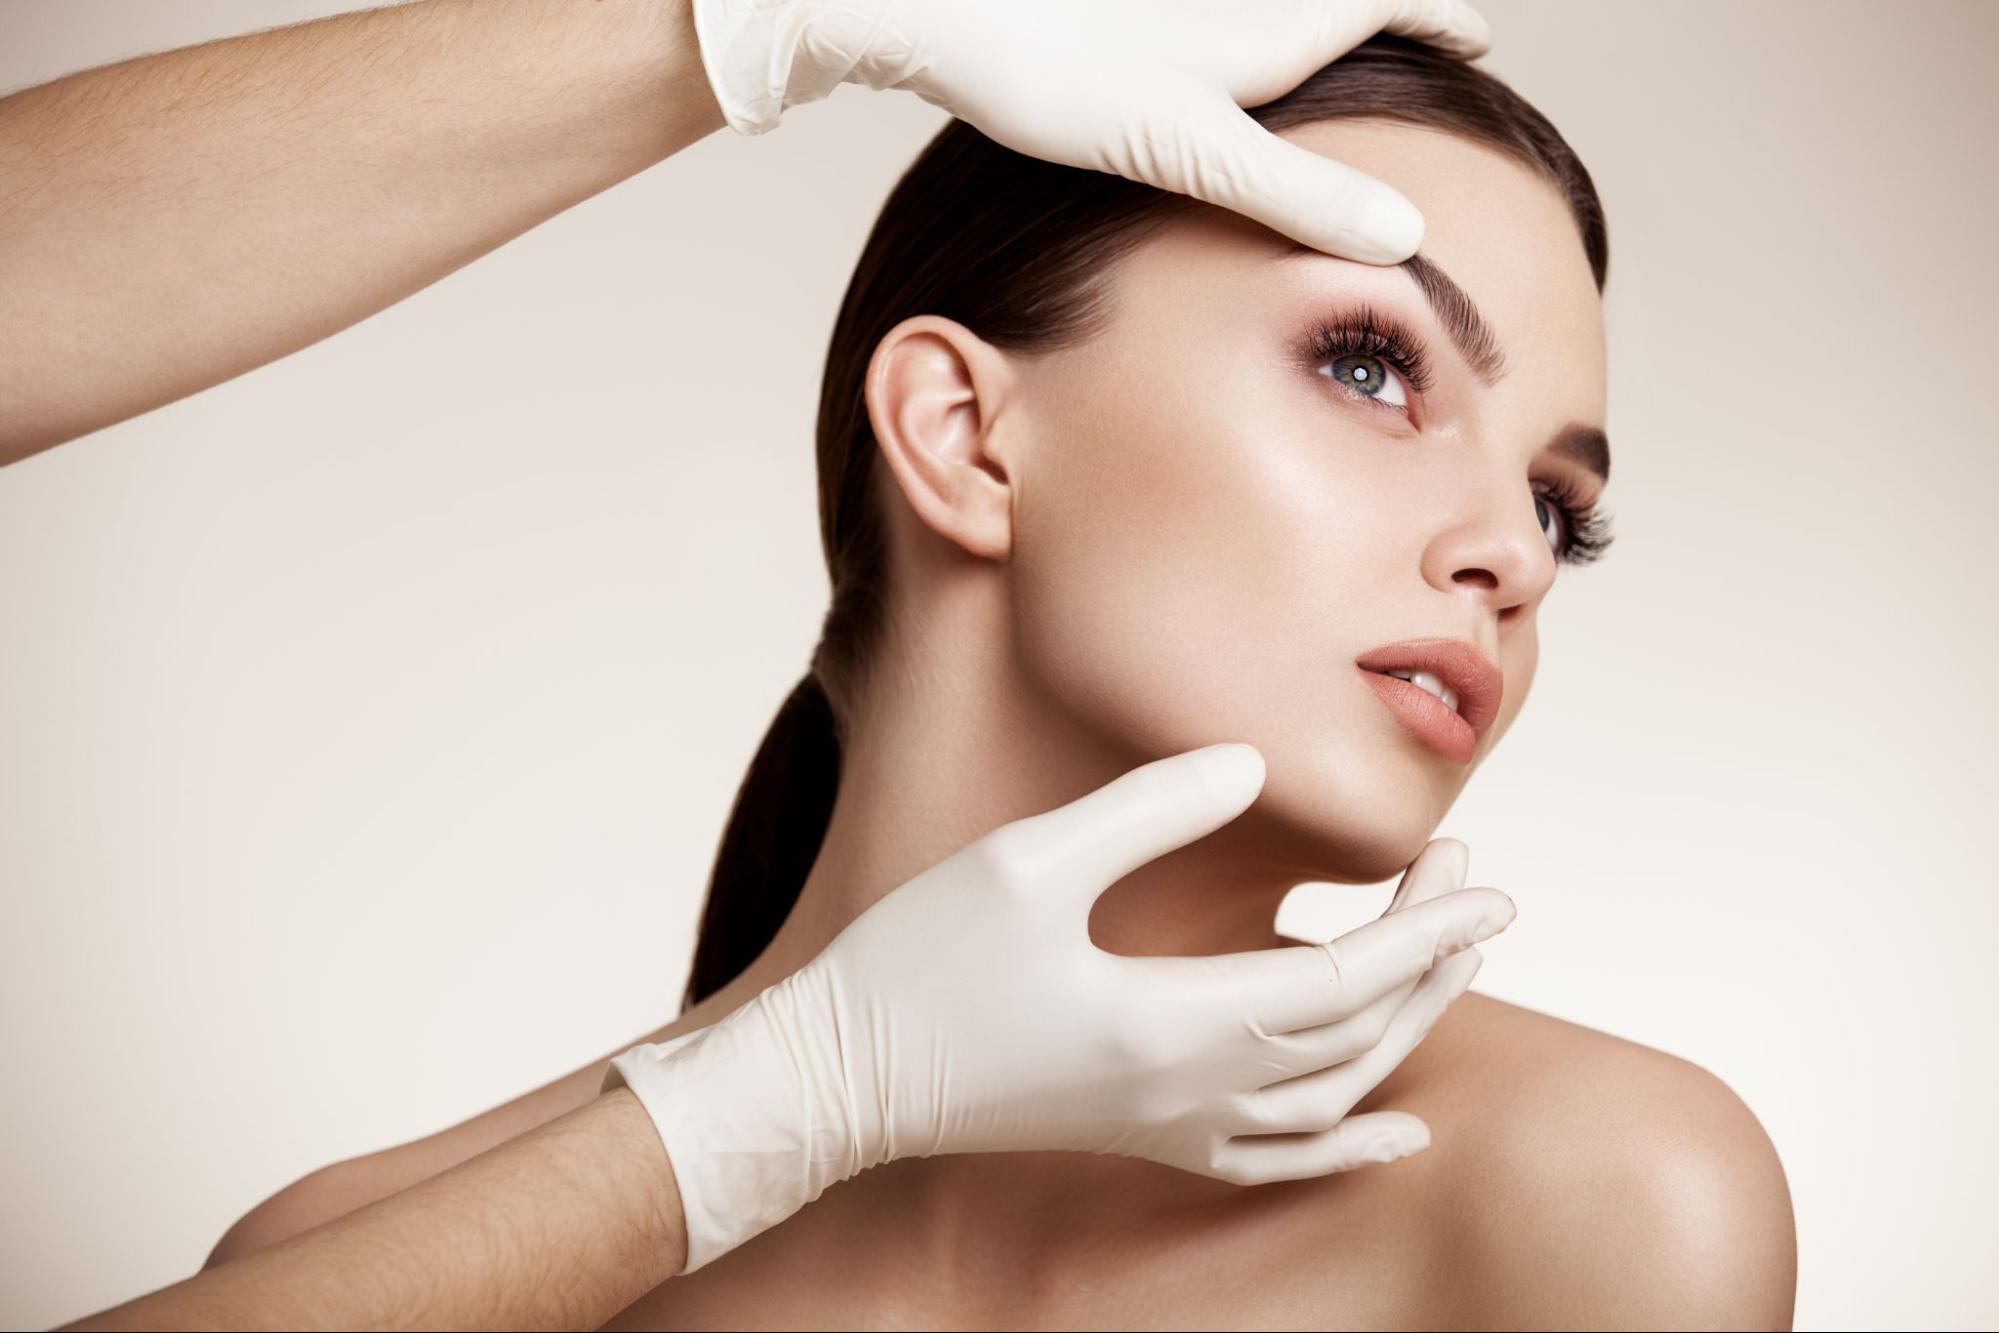 Is Cosmetic Surgery Right For You?